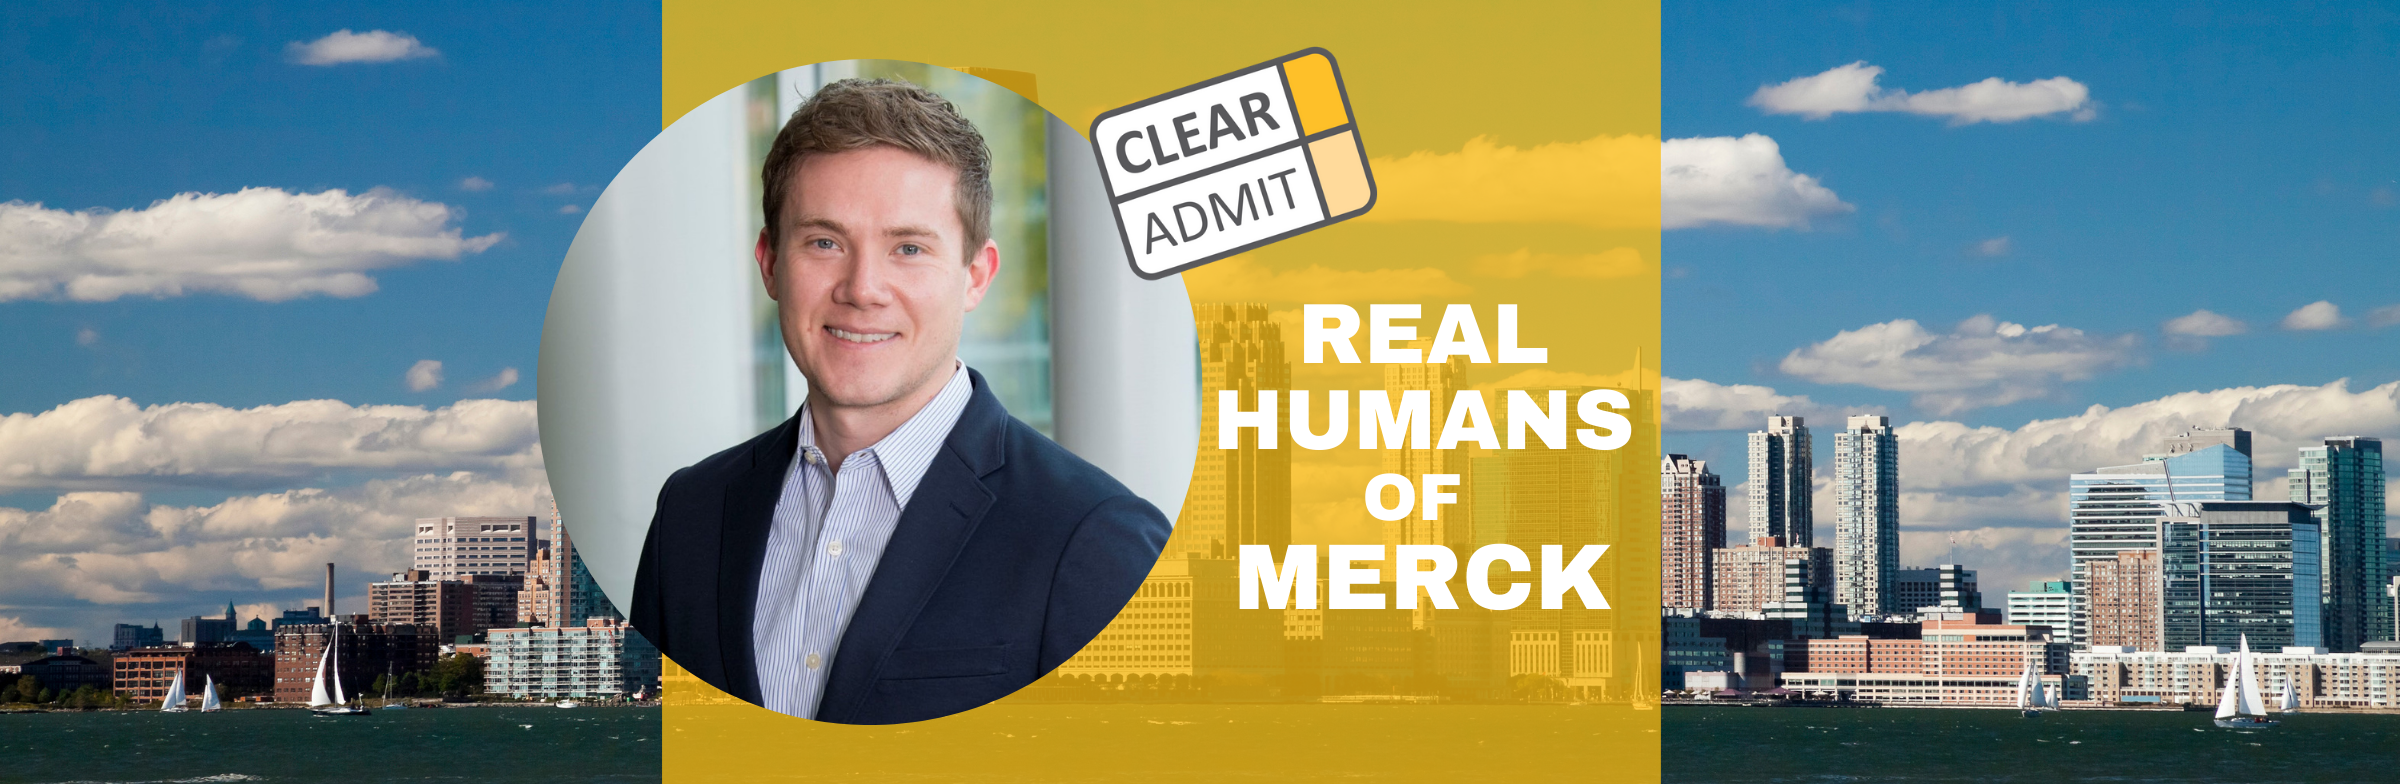 Image for Real Humans of Merck: Drew Soloski, Wharton ’16, Project Manager, Global Project and Alliance Management – Oncology & Vaccines (Late Stage)